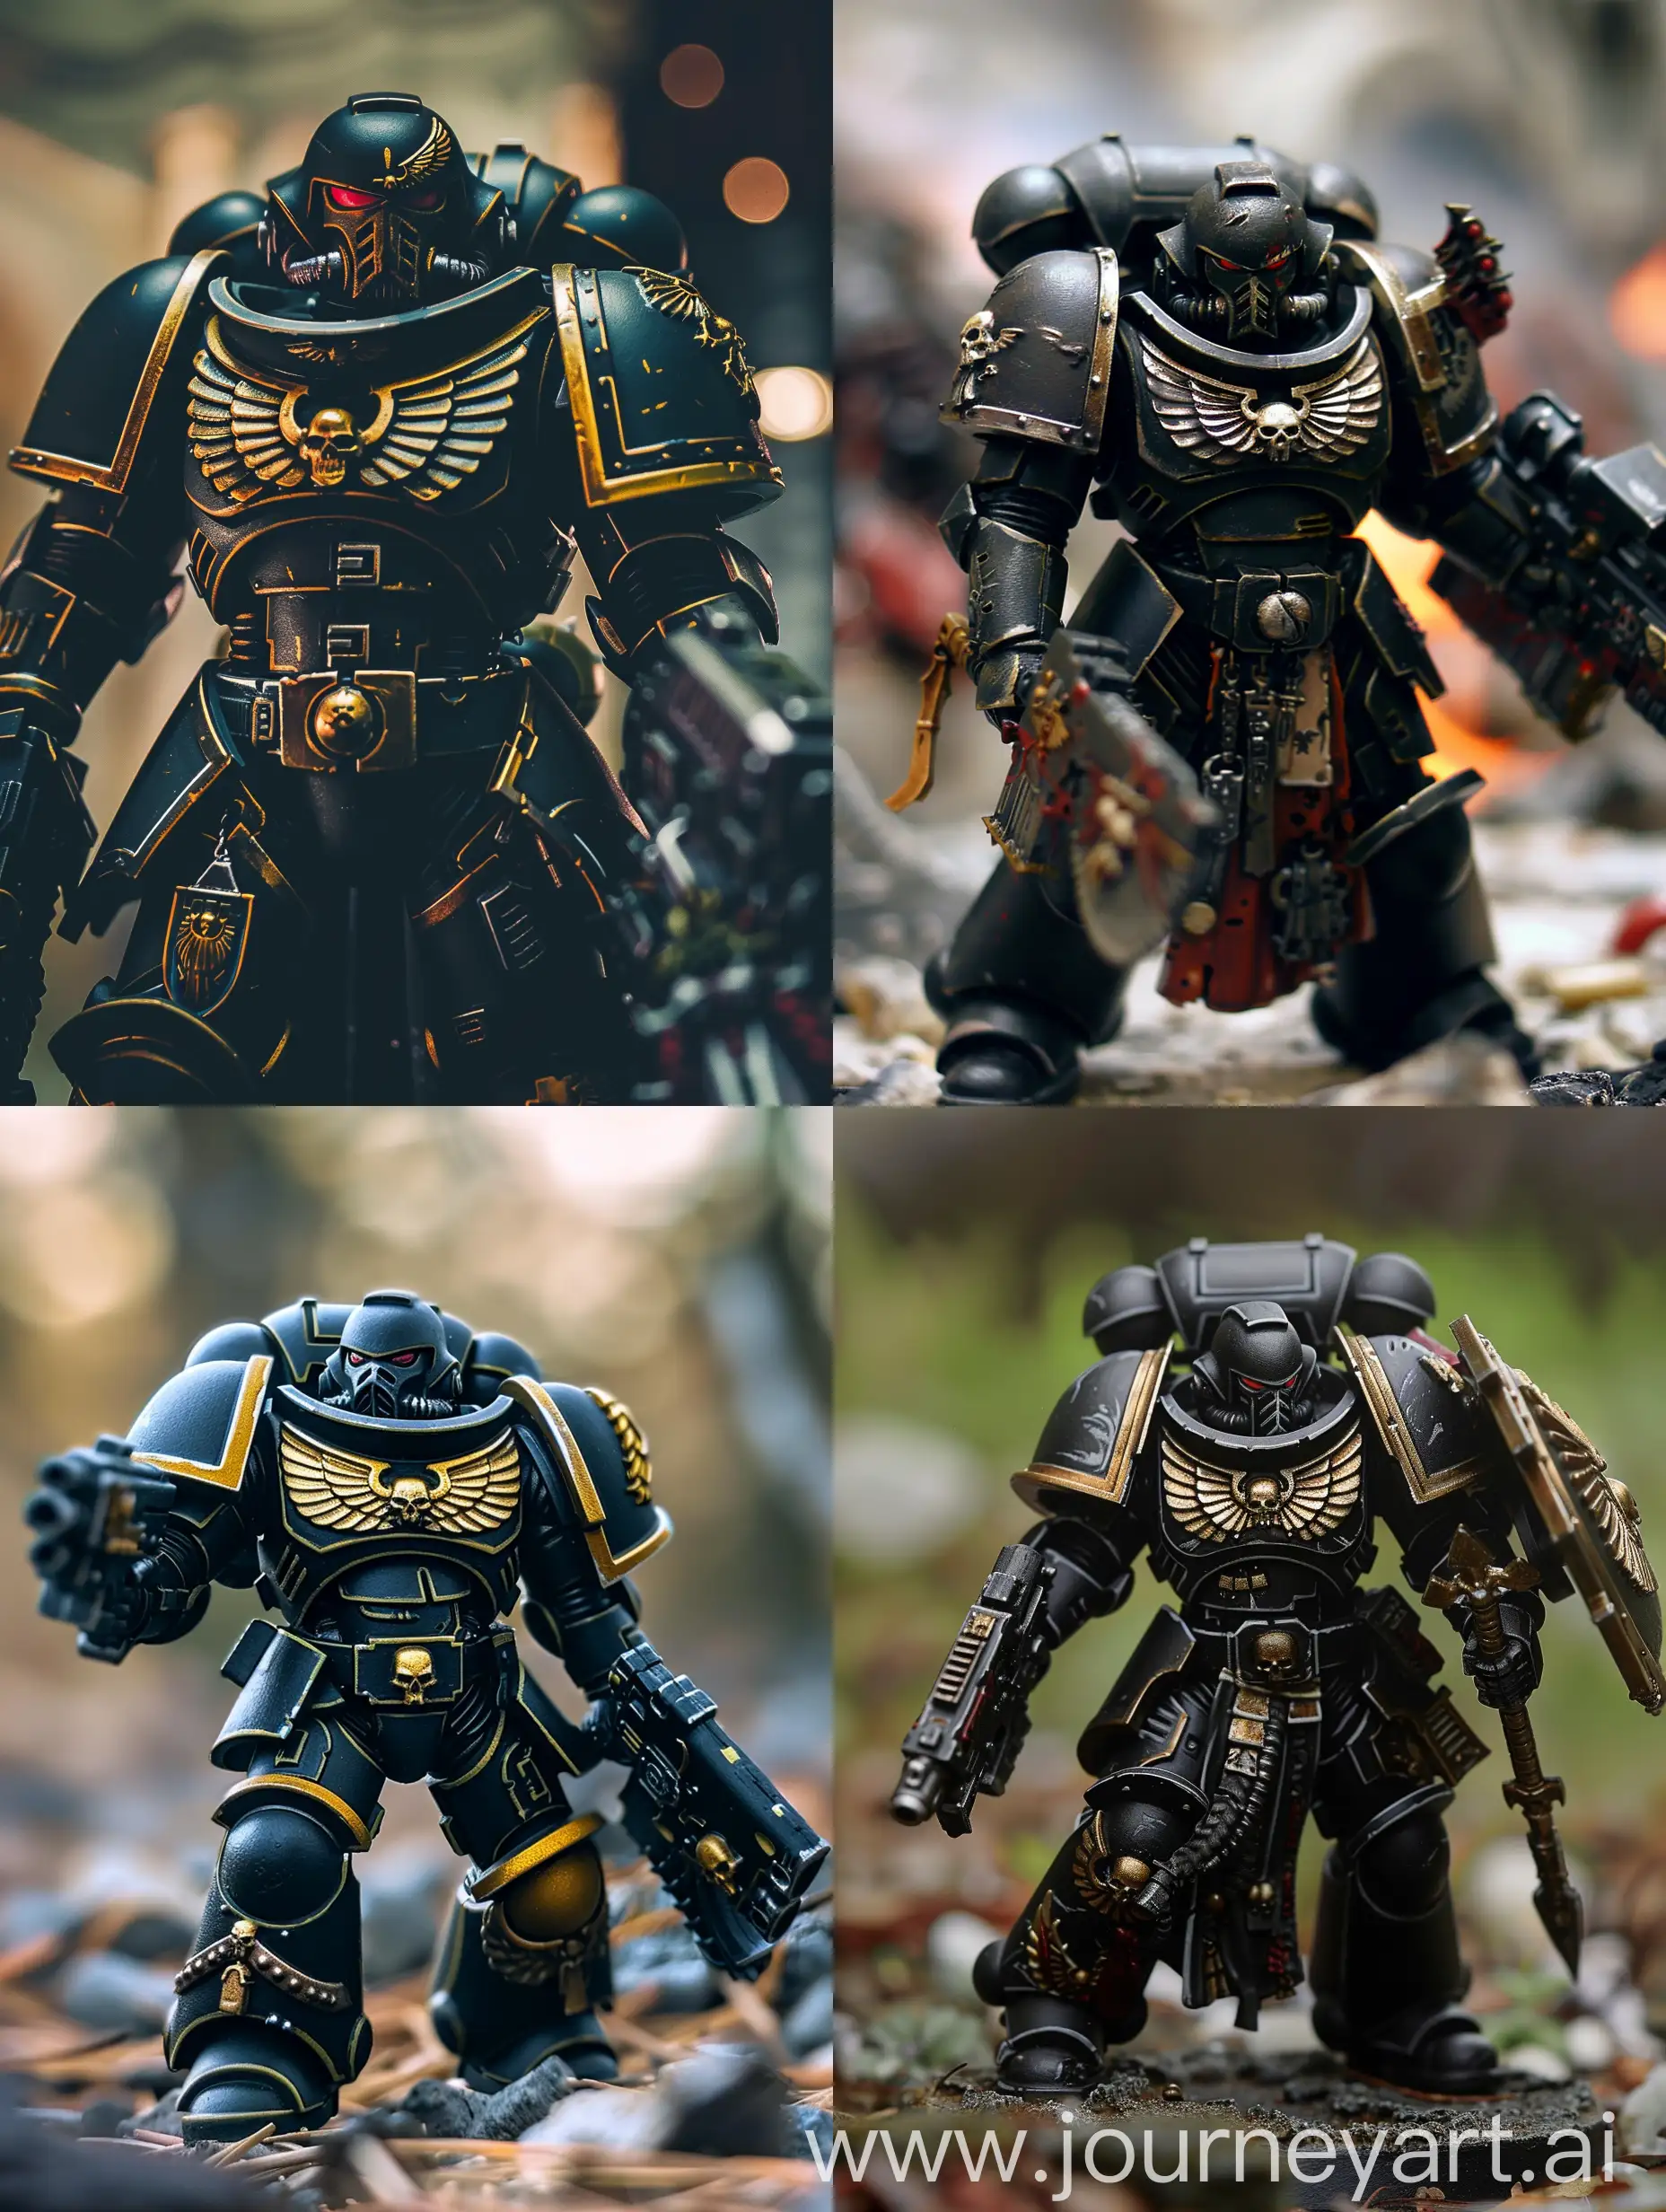 The Dark Angels from the Warhammer 40k.